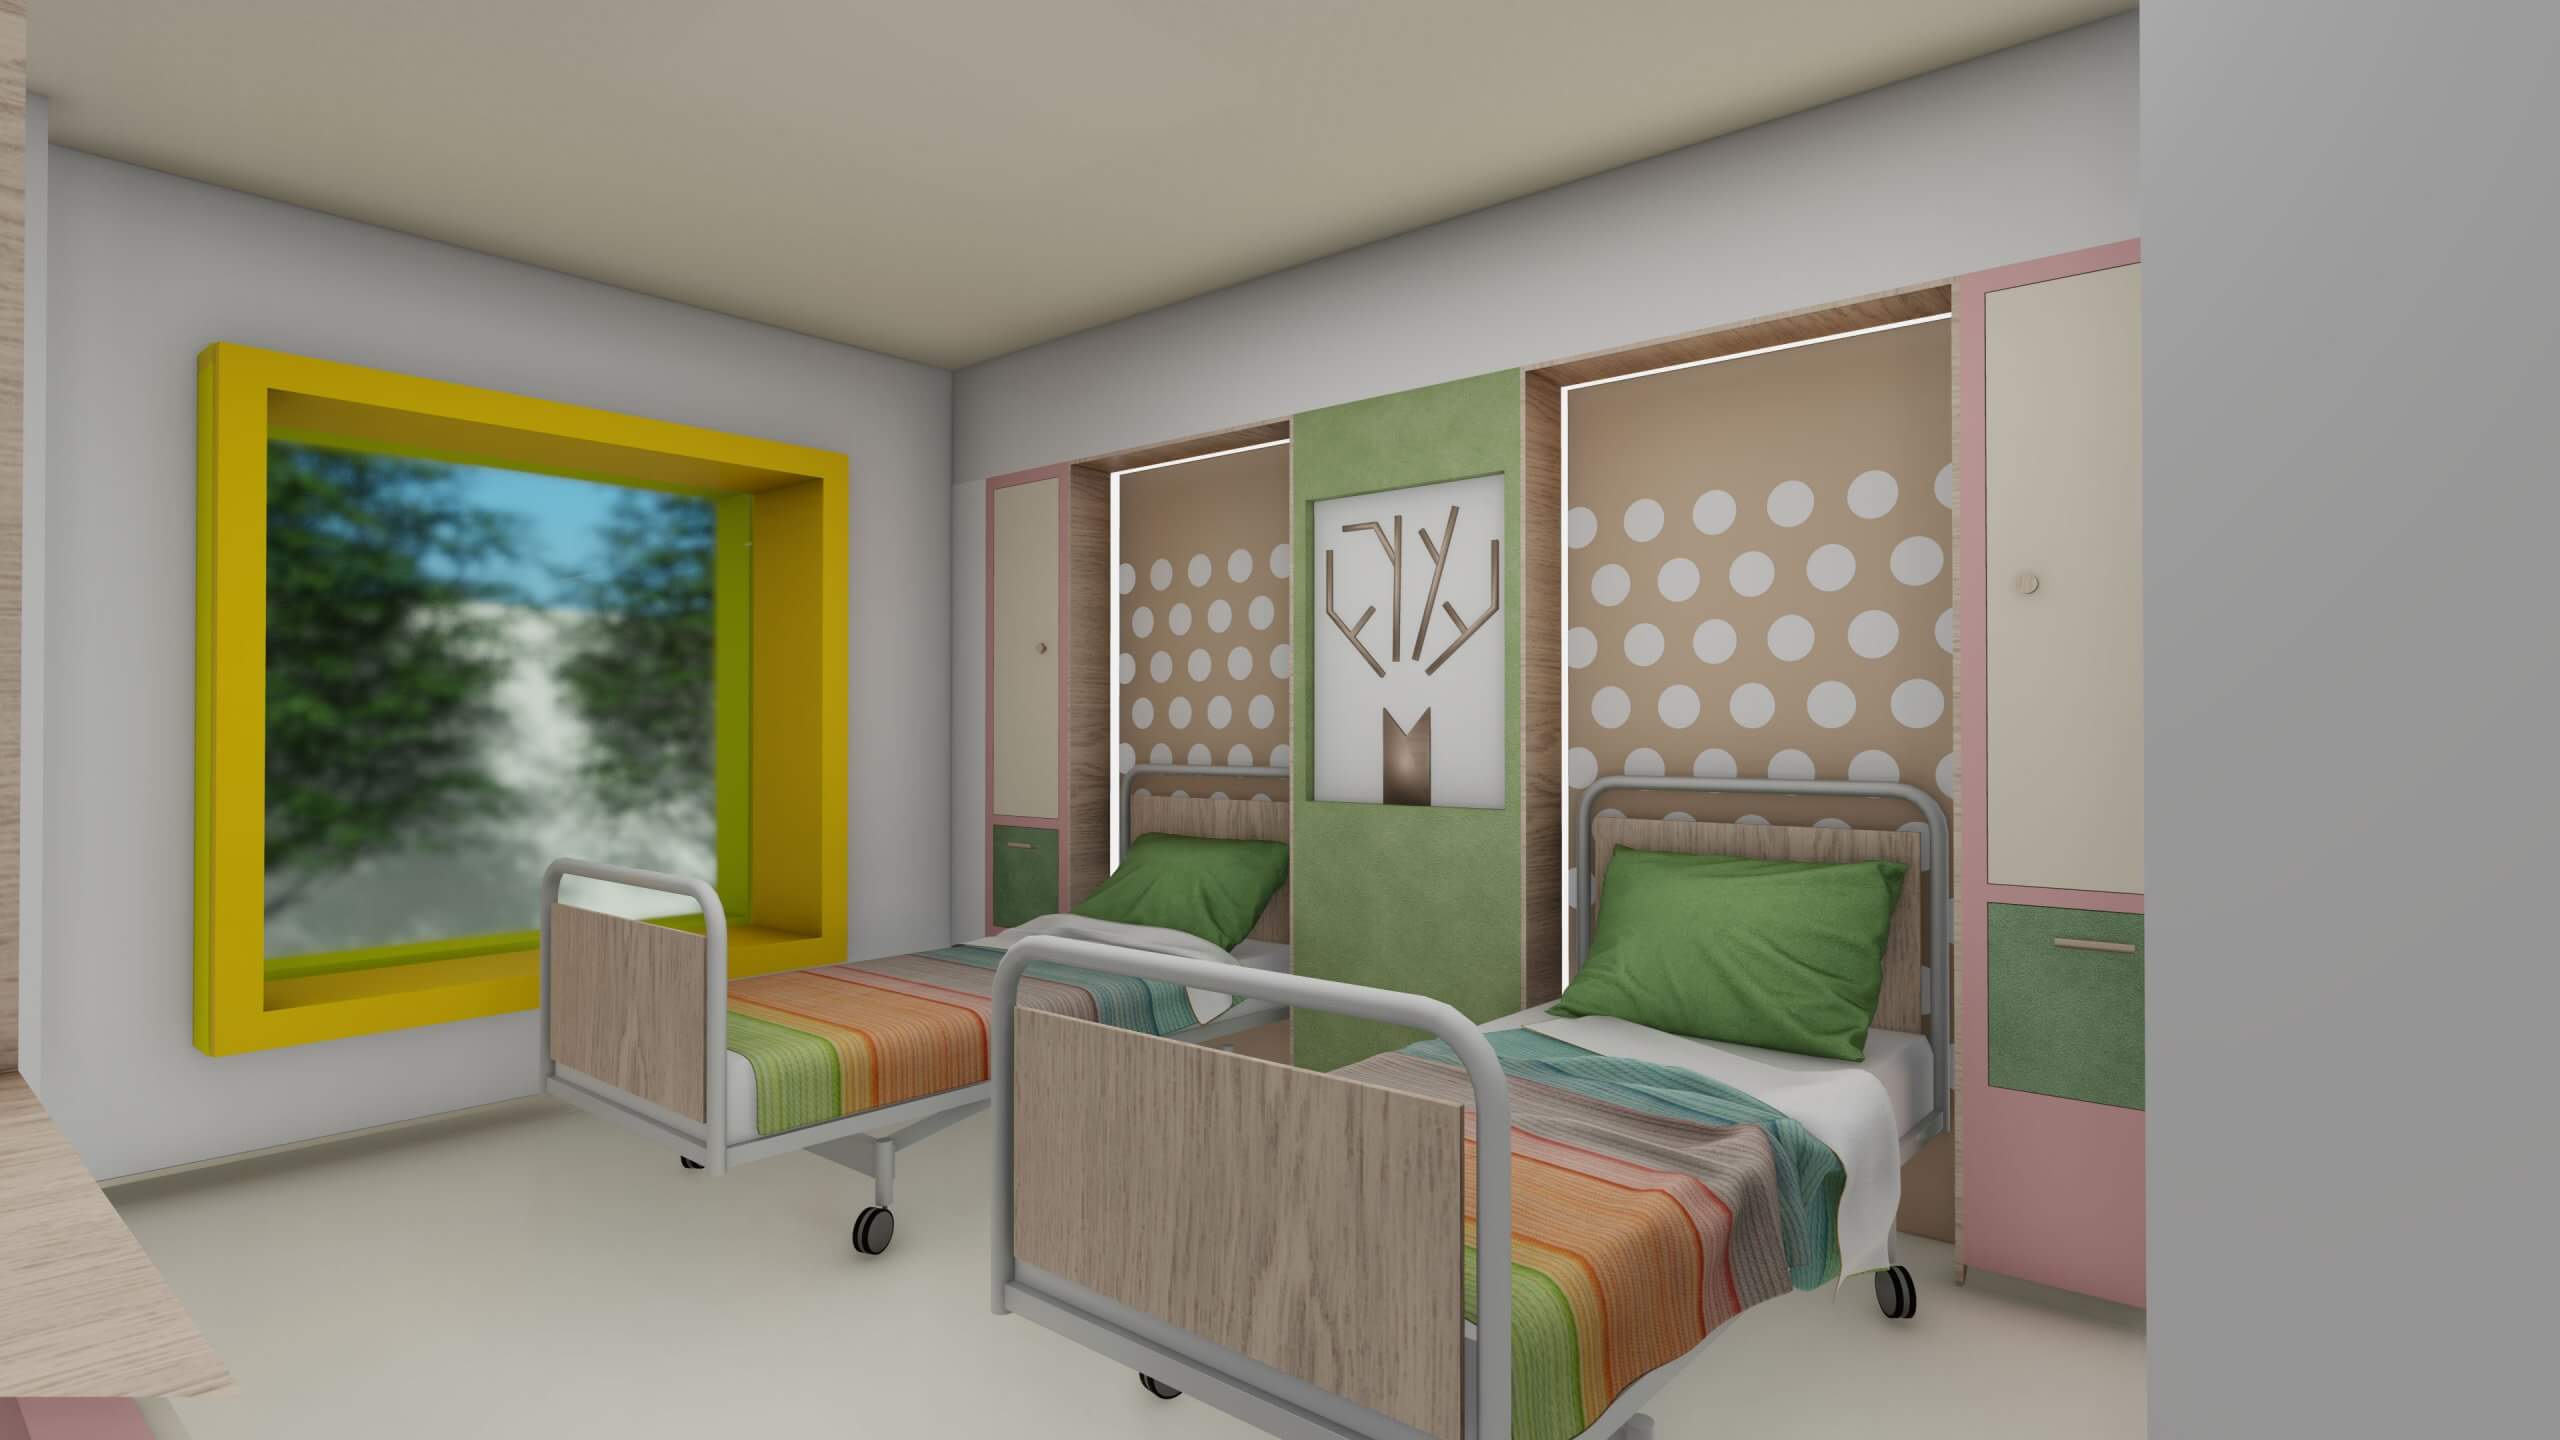 Extension of Children Clinical Emergency Hospital Marie Curie